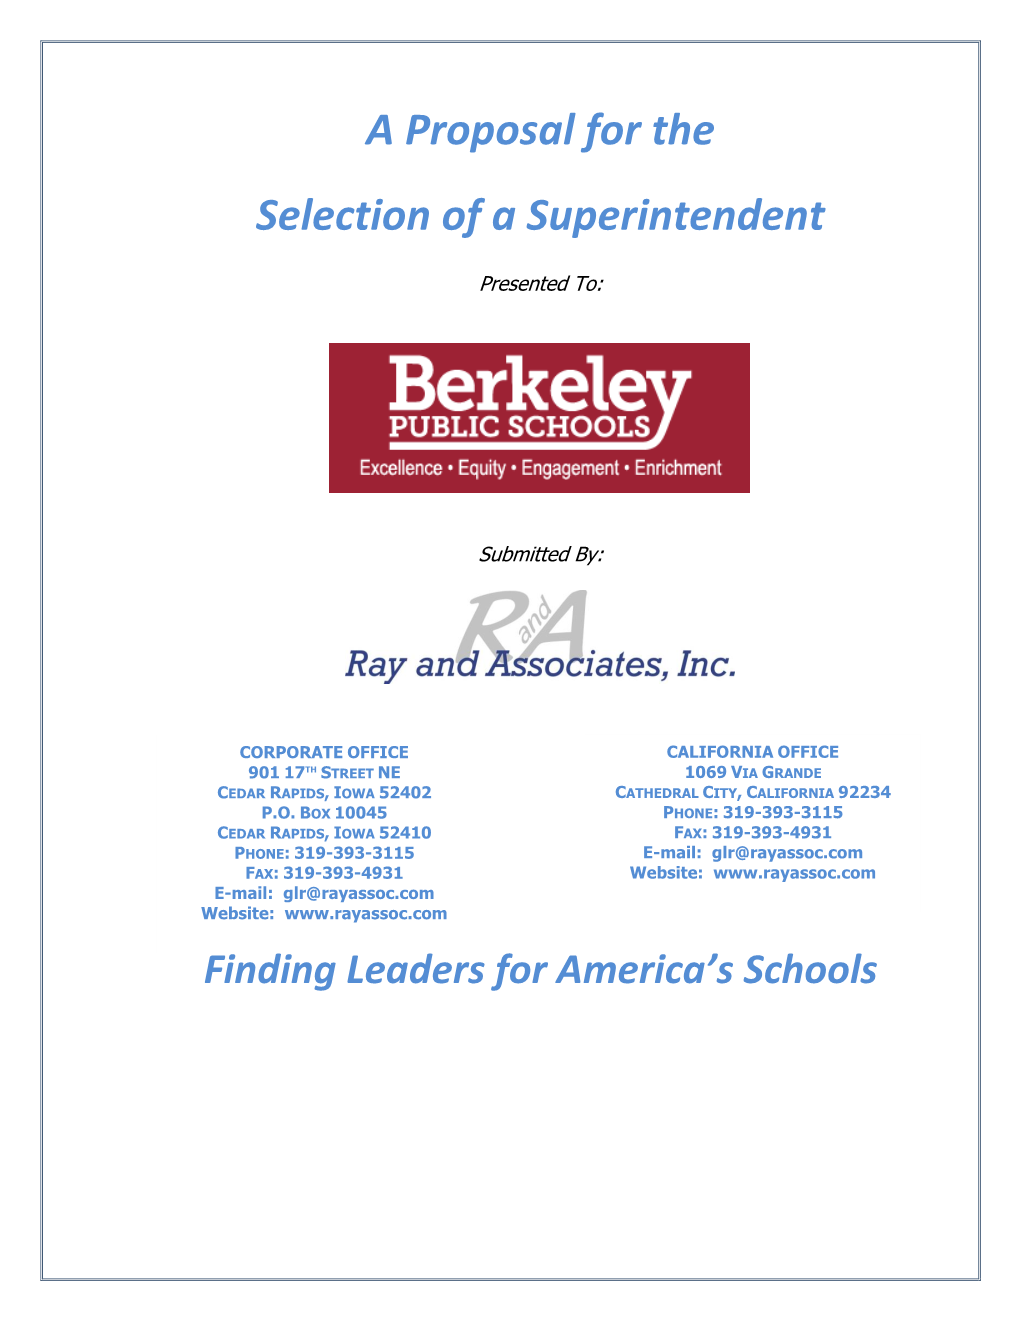 A Proposal for the Selection of a Superintendent